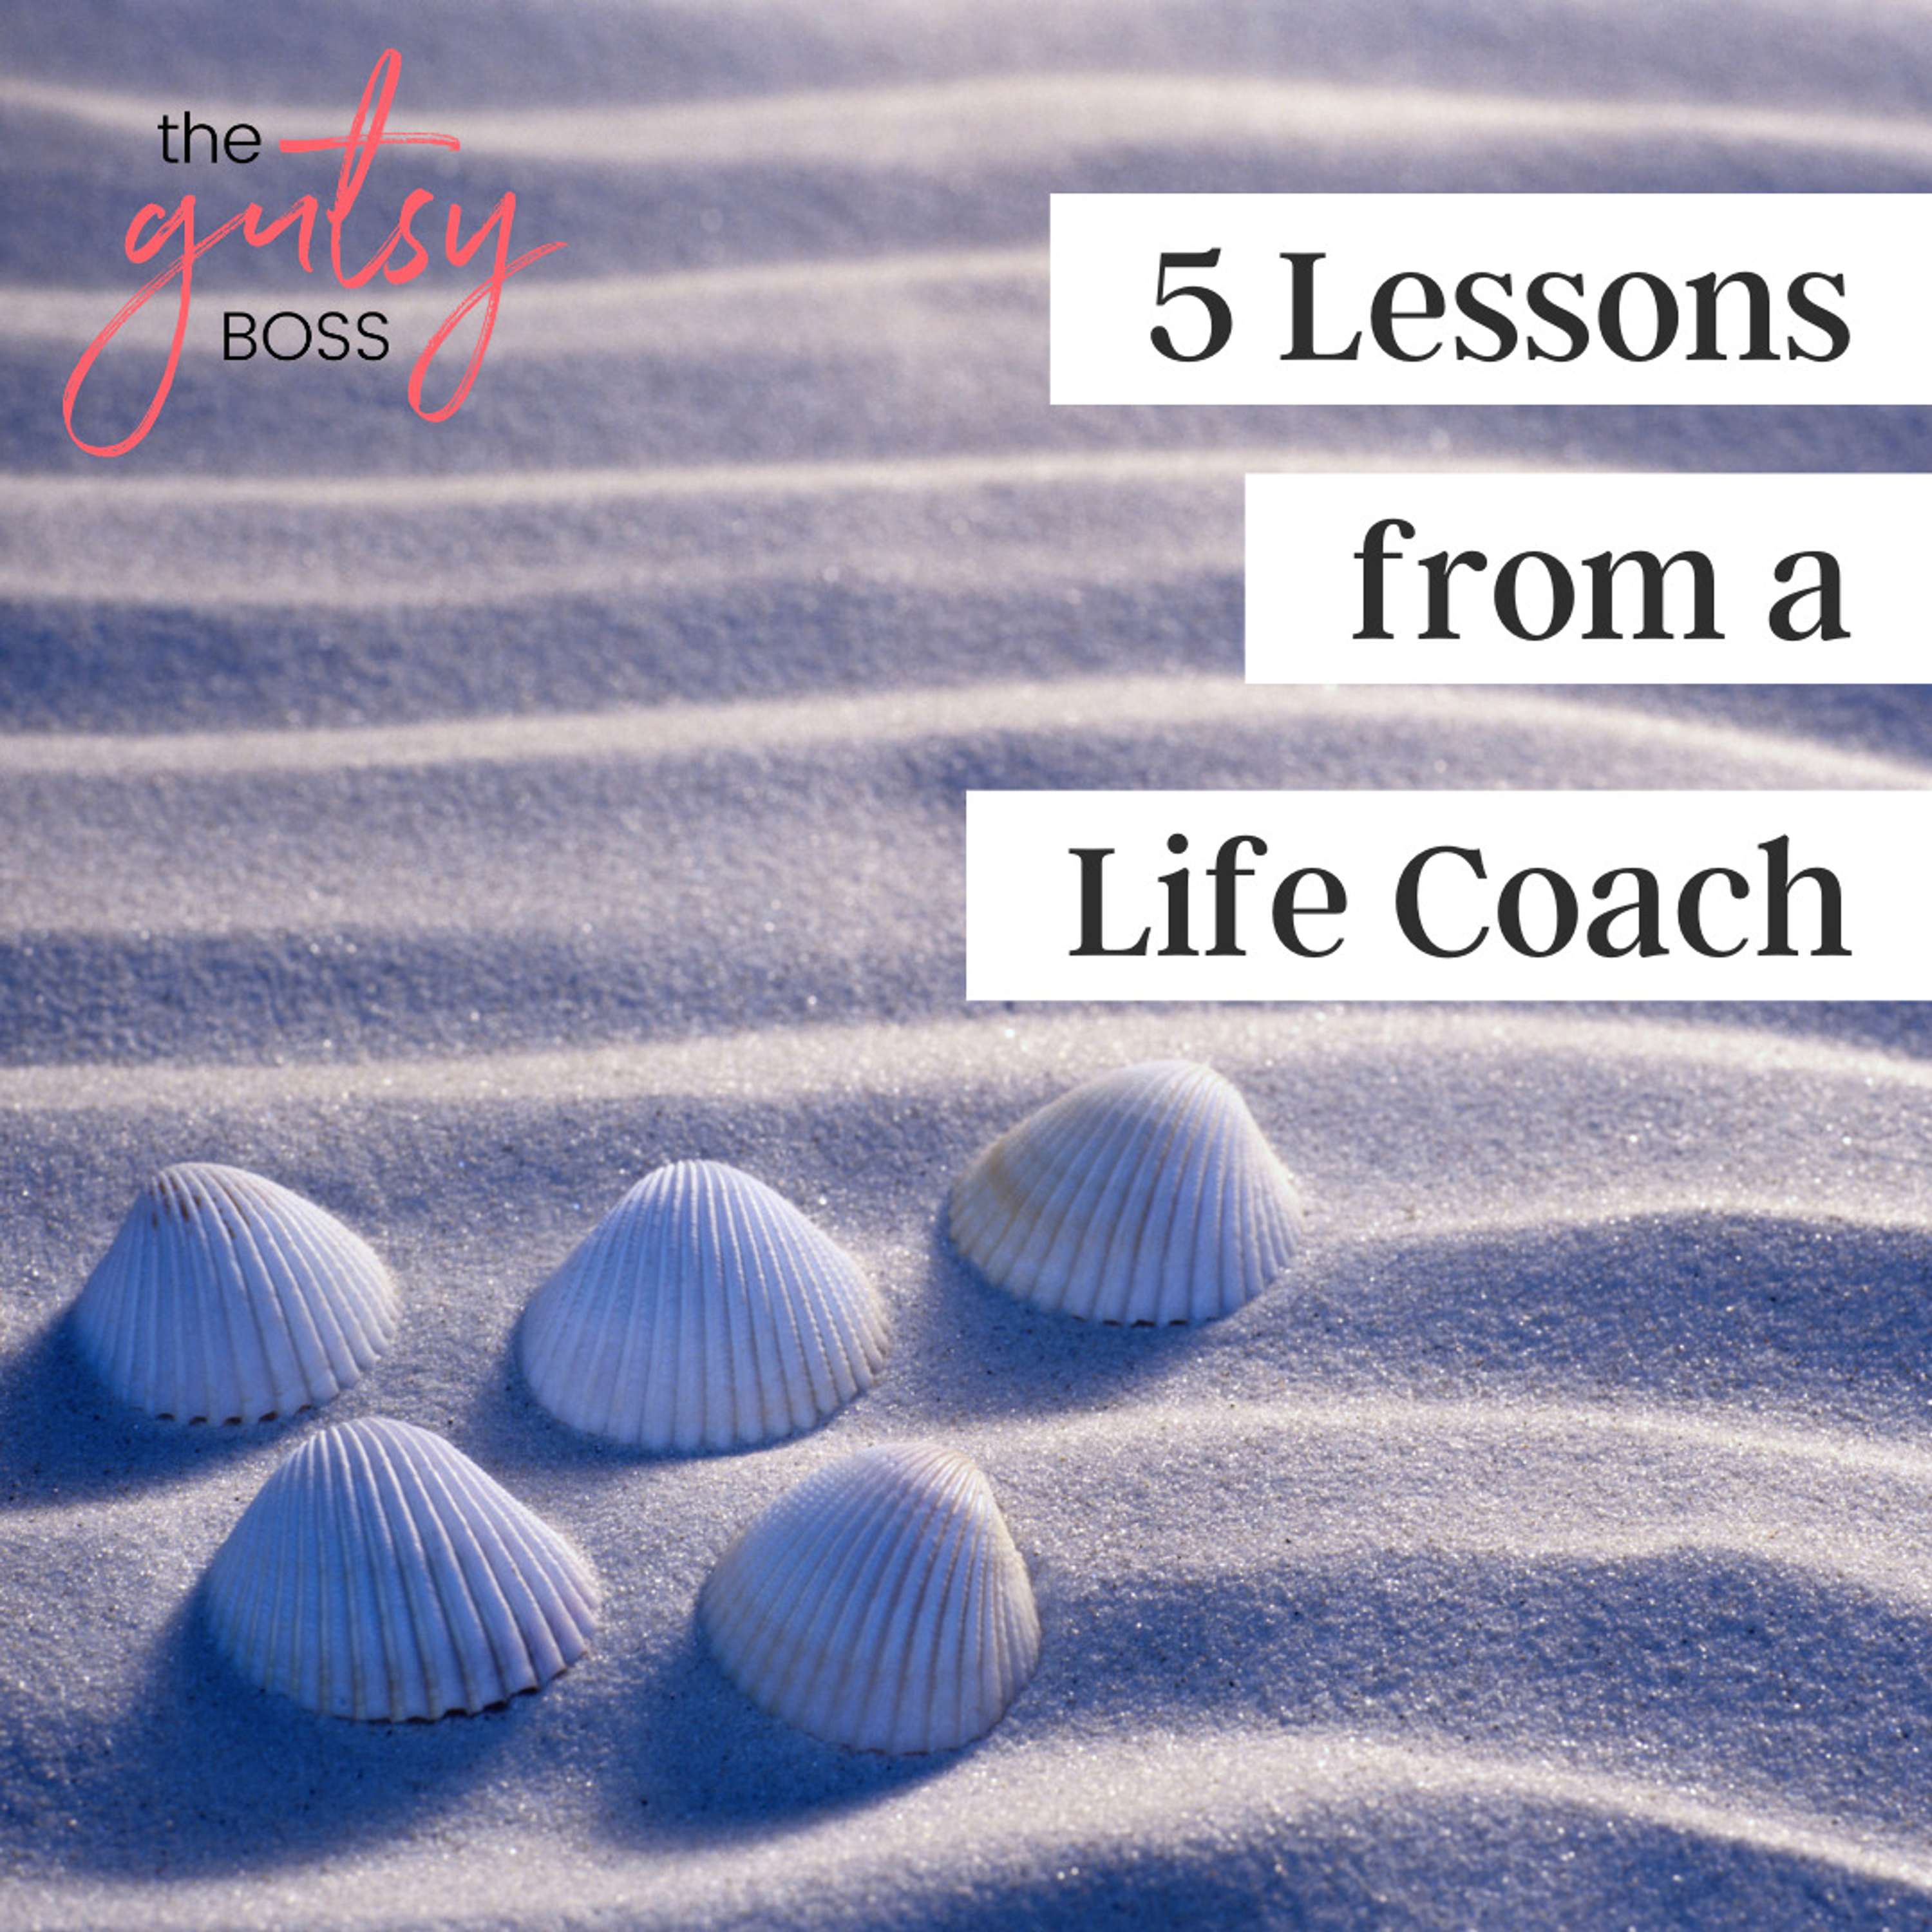 24. 5 Lessons from a Life Coach